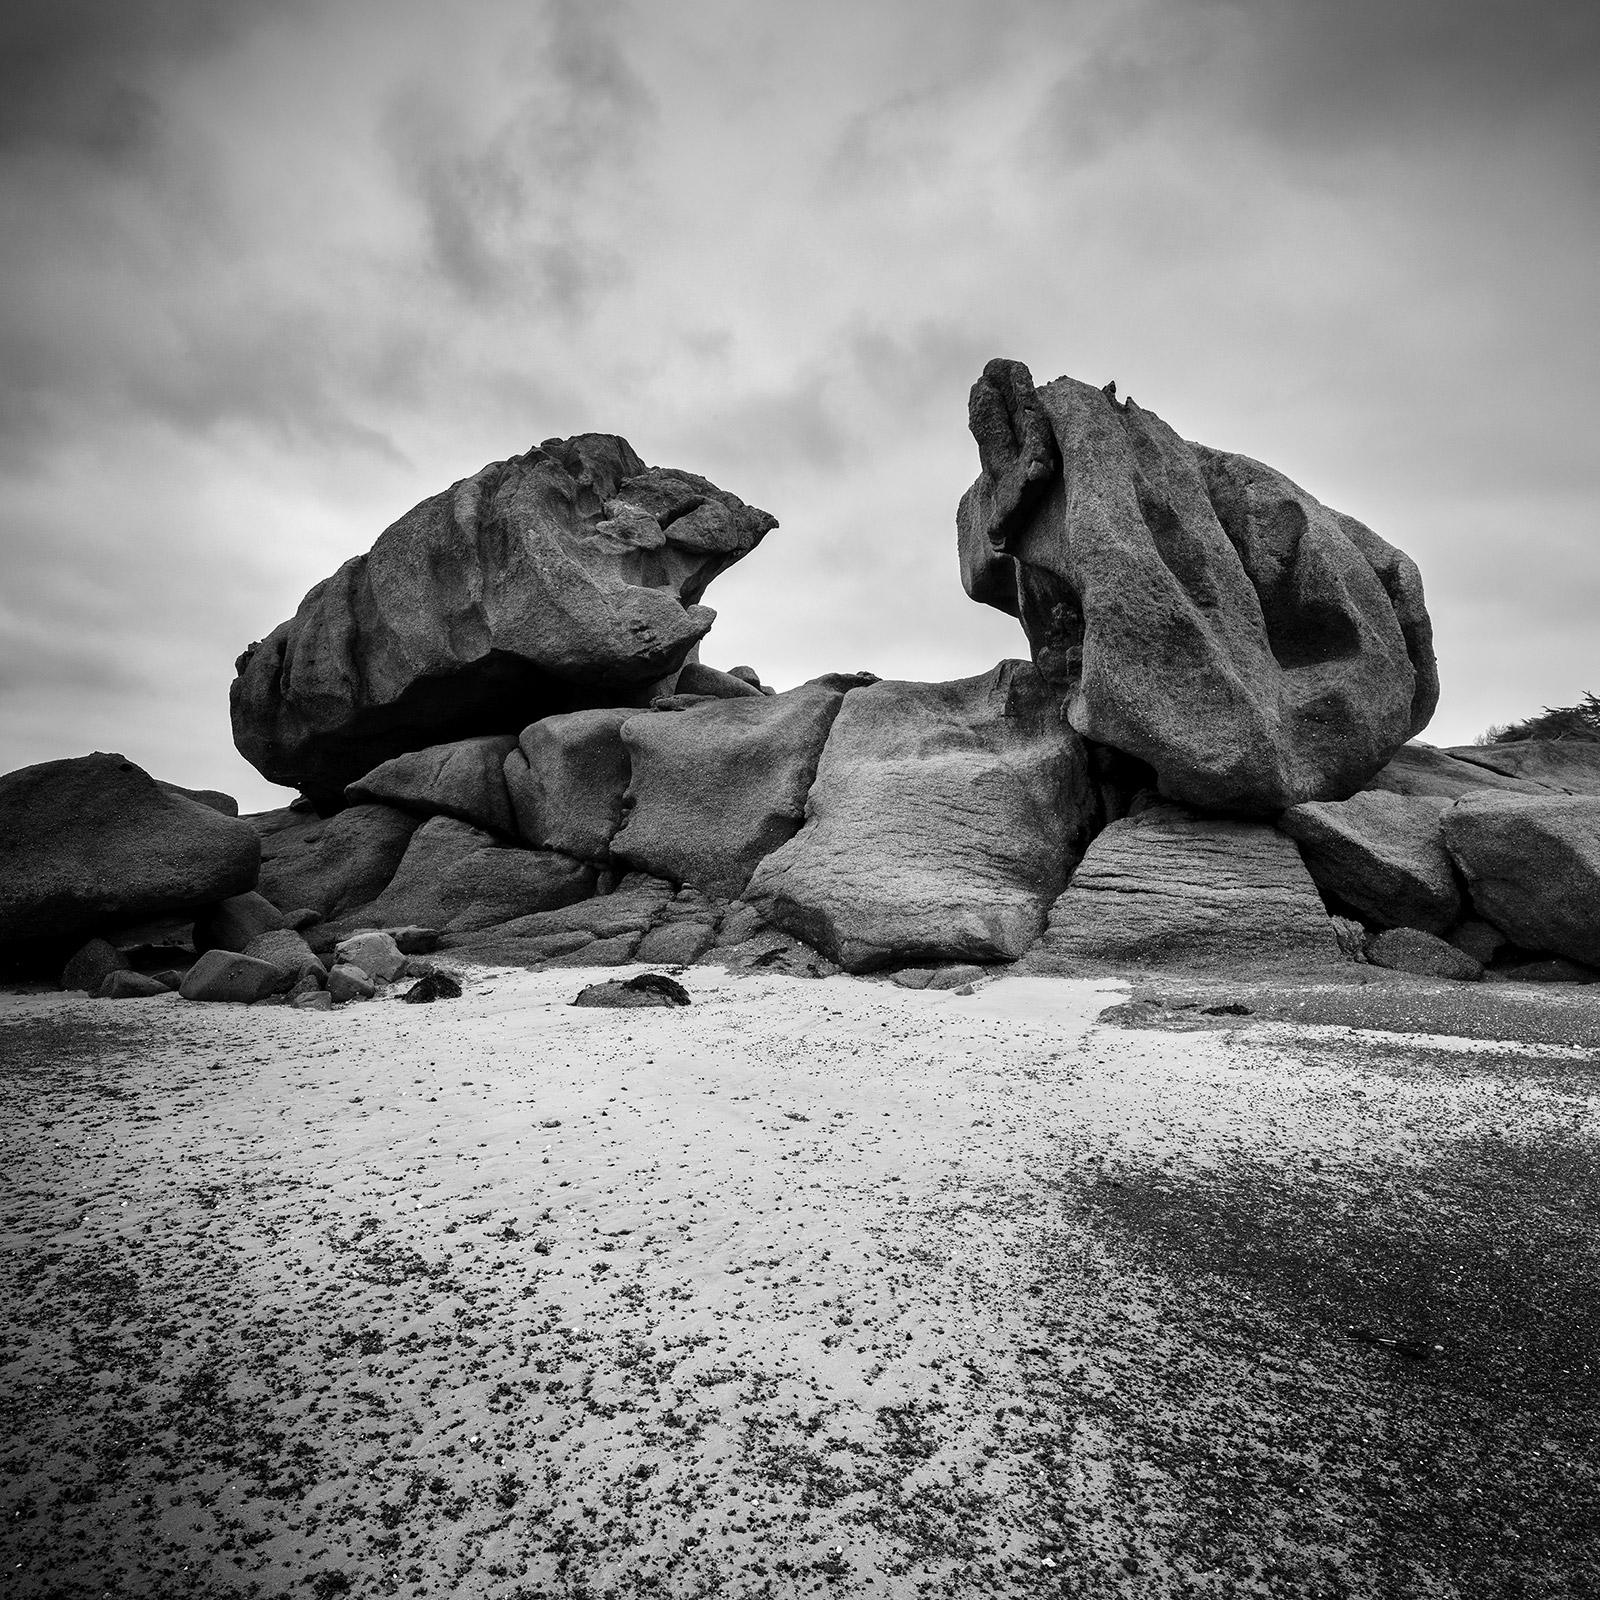 Gerald Berghammer Landscape Photograph - Crab Claws Rock, Granite Coast, France, black and white landscape photography